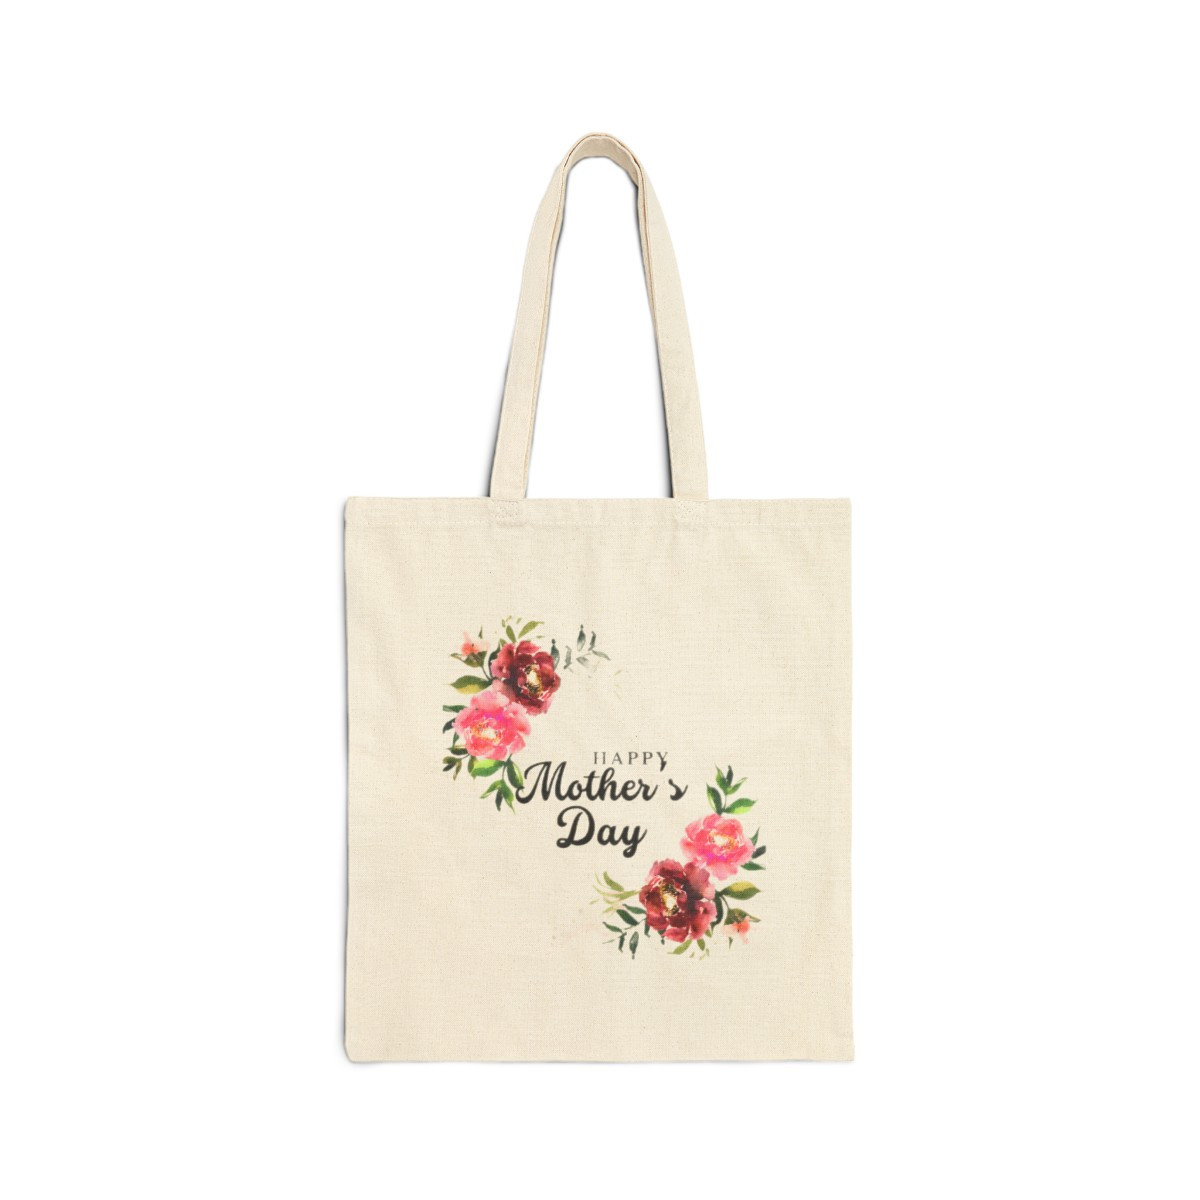 Check out our The Perfect Mom's Day Cotton Tote Bag (Gifts for Grandma too!) at wix.to/VCWGt07
#checkitout